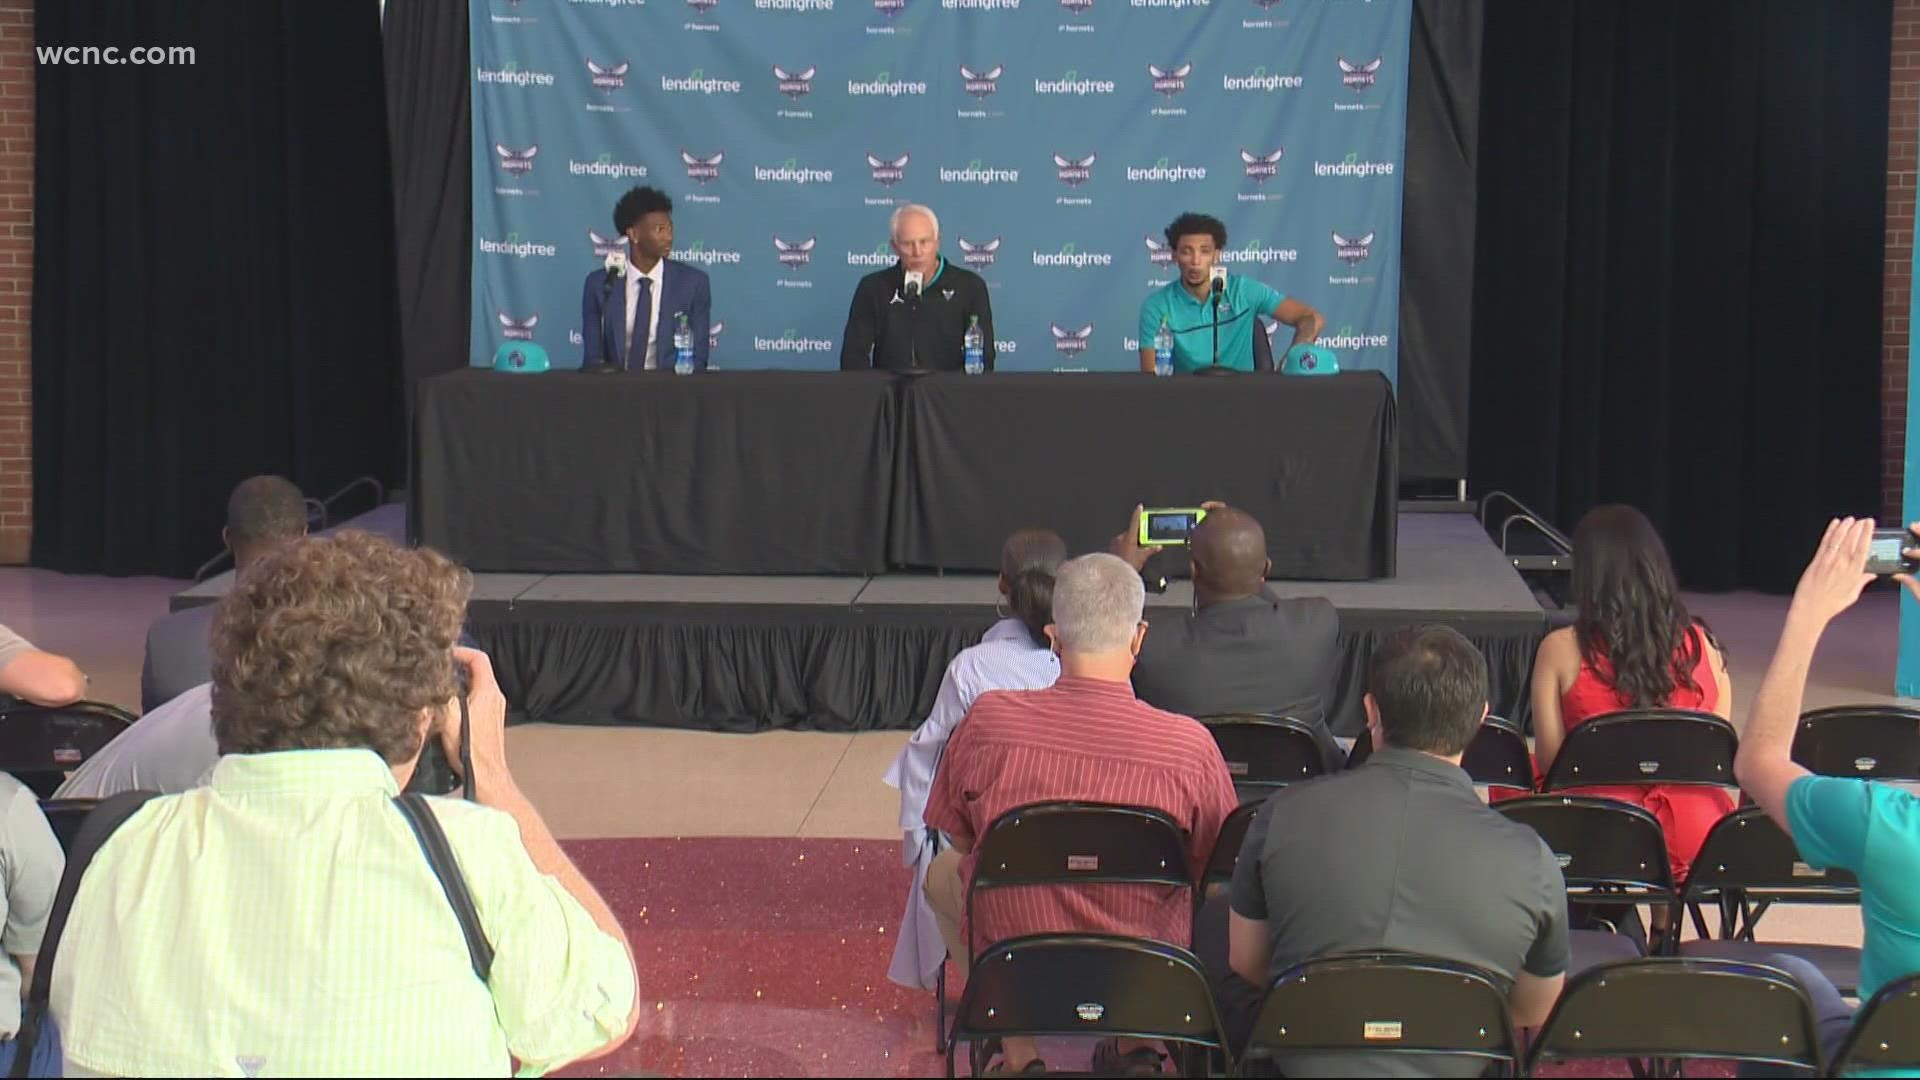 The Hornets' picks say they're ready to bring their talent and youth to the team.